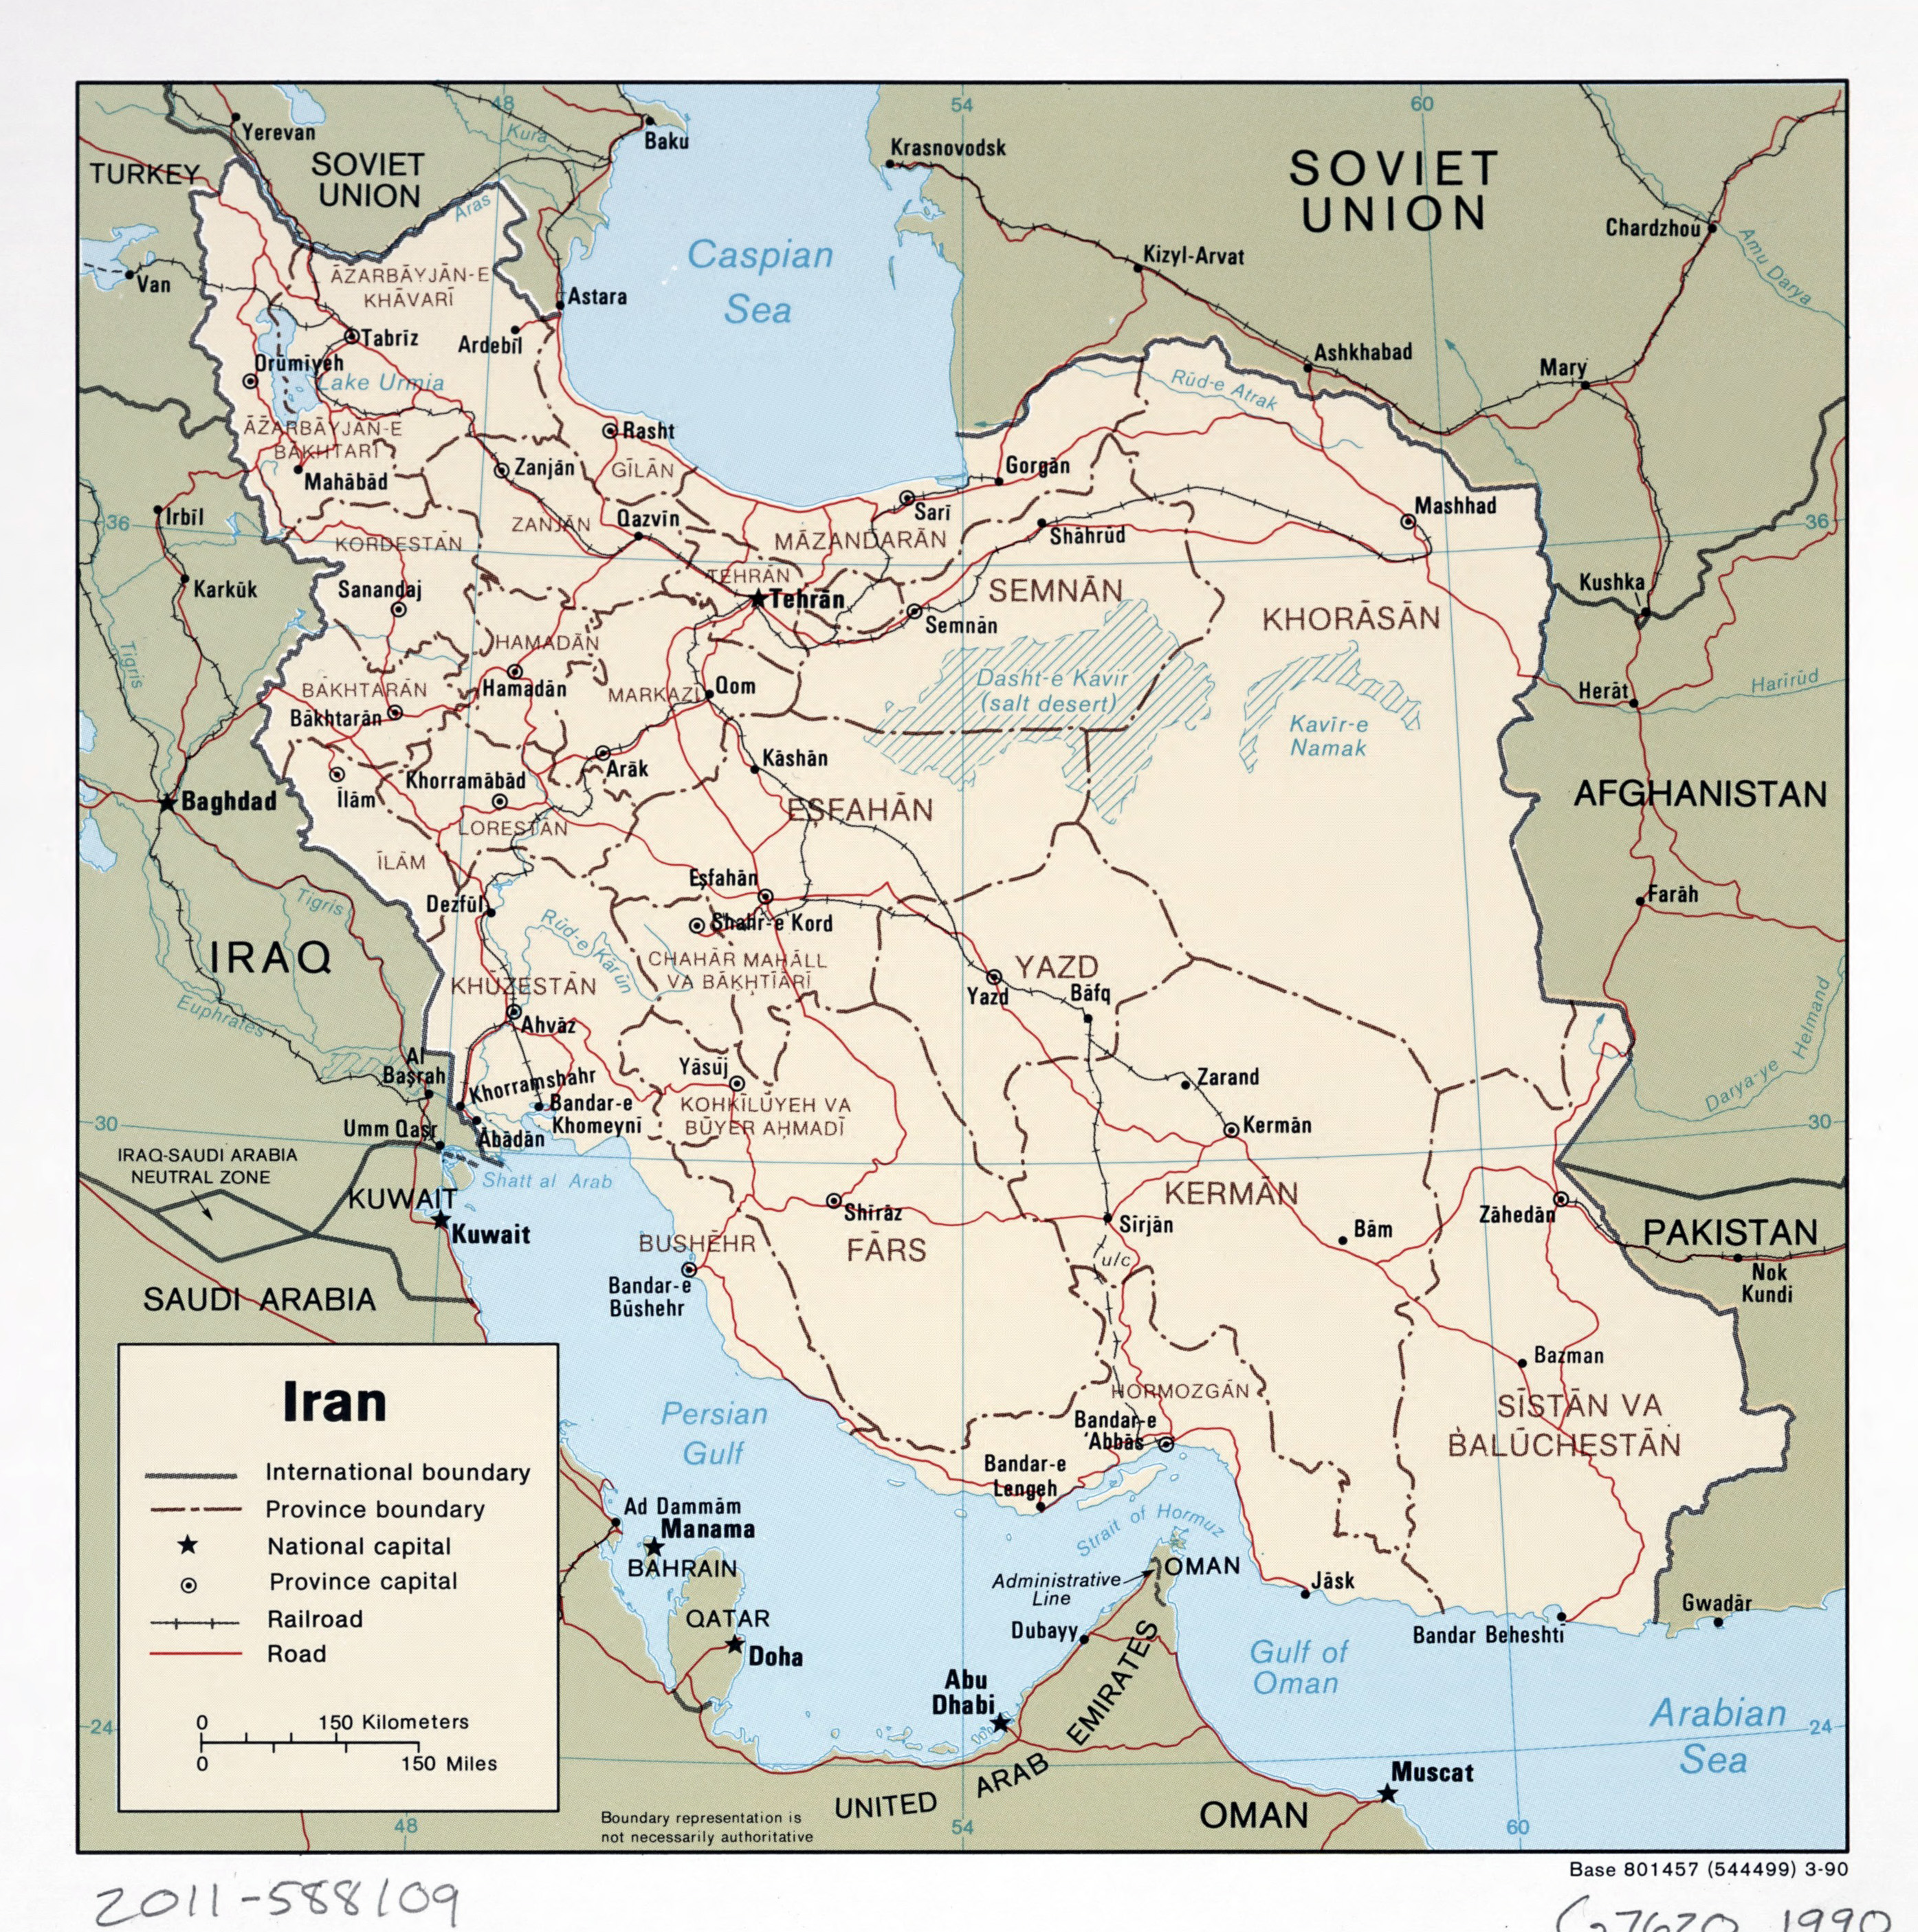 Large Detailed Political And Administrative Map Of Iran With Roads Railroads And Major Cities 1990 